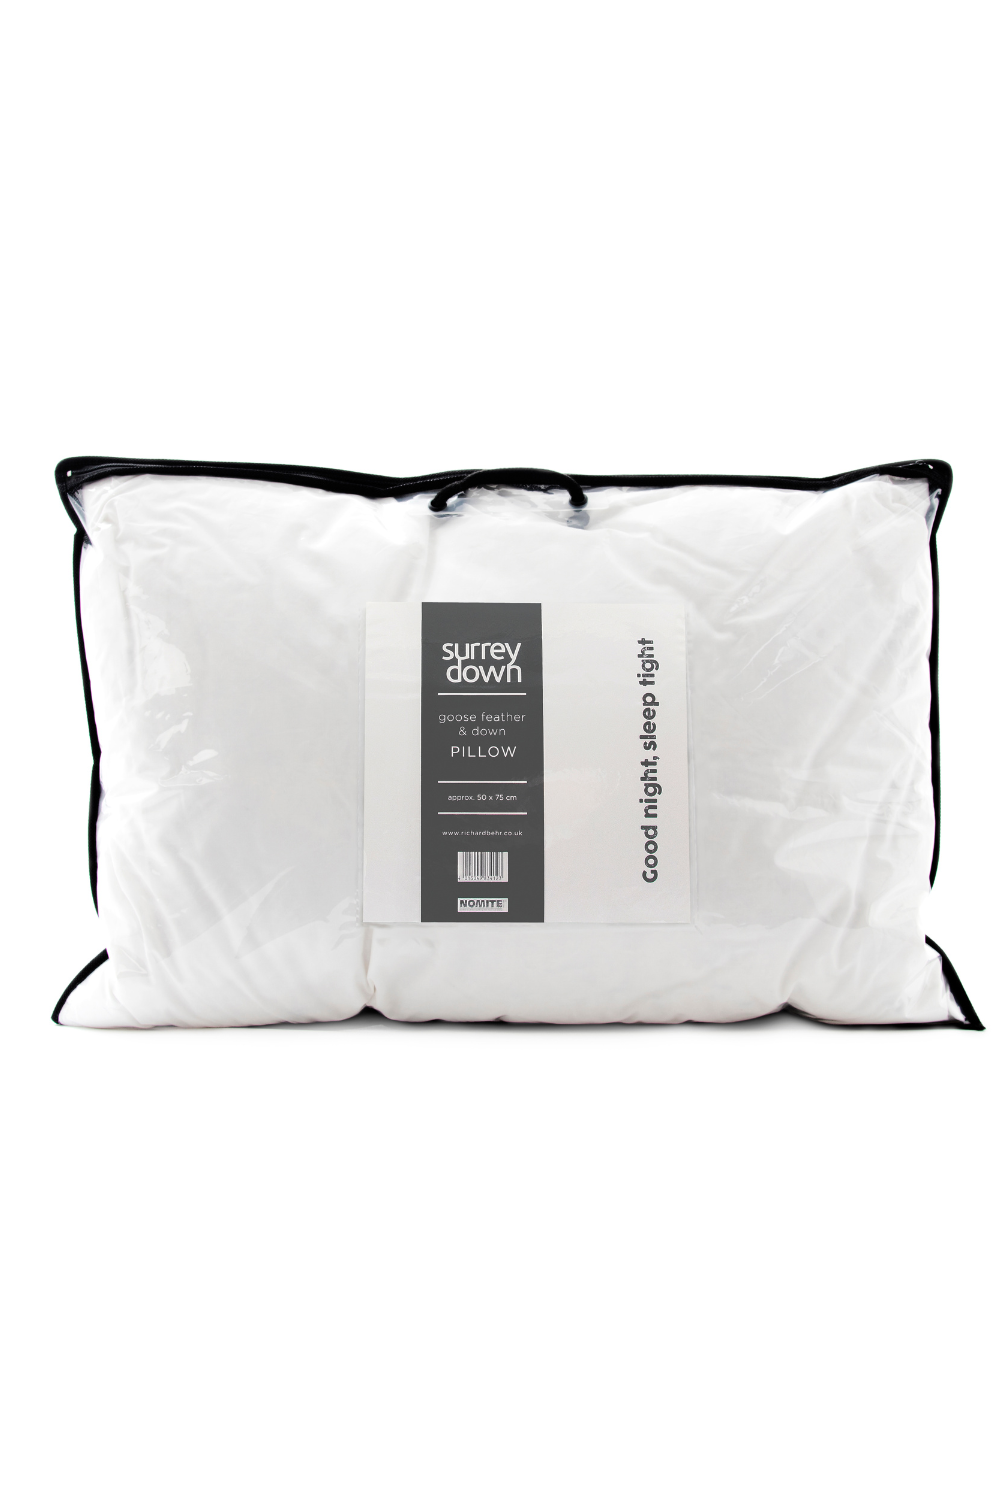 Surrey Down Goose Feather and Down Medium Firmness Pillow